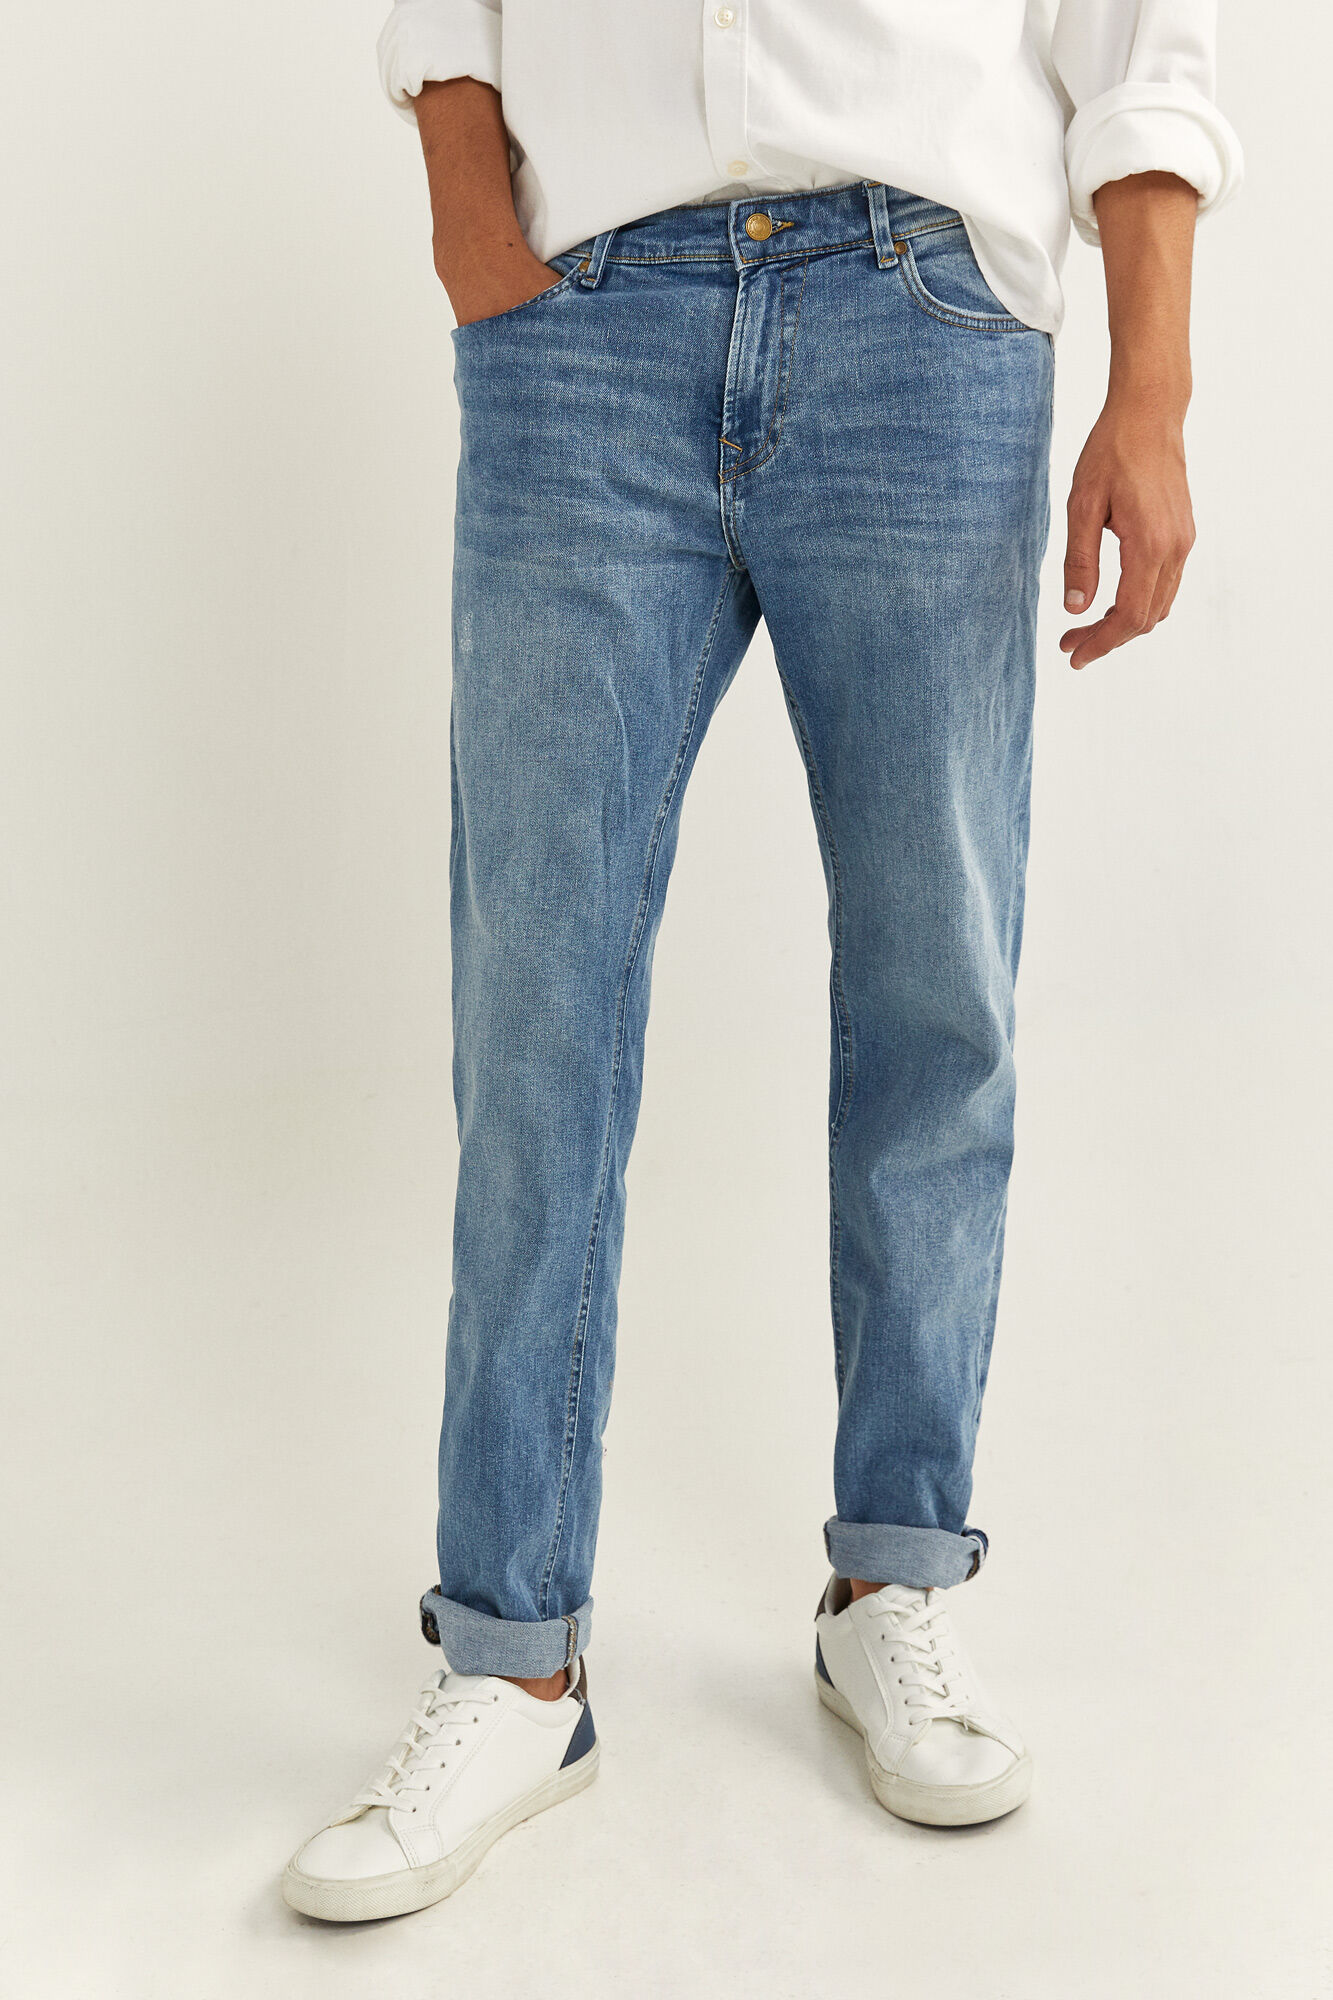 juniors cropped jeans